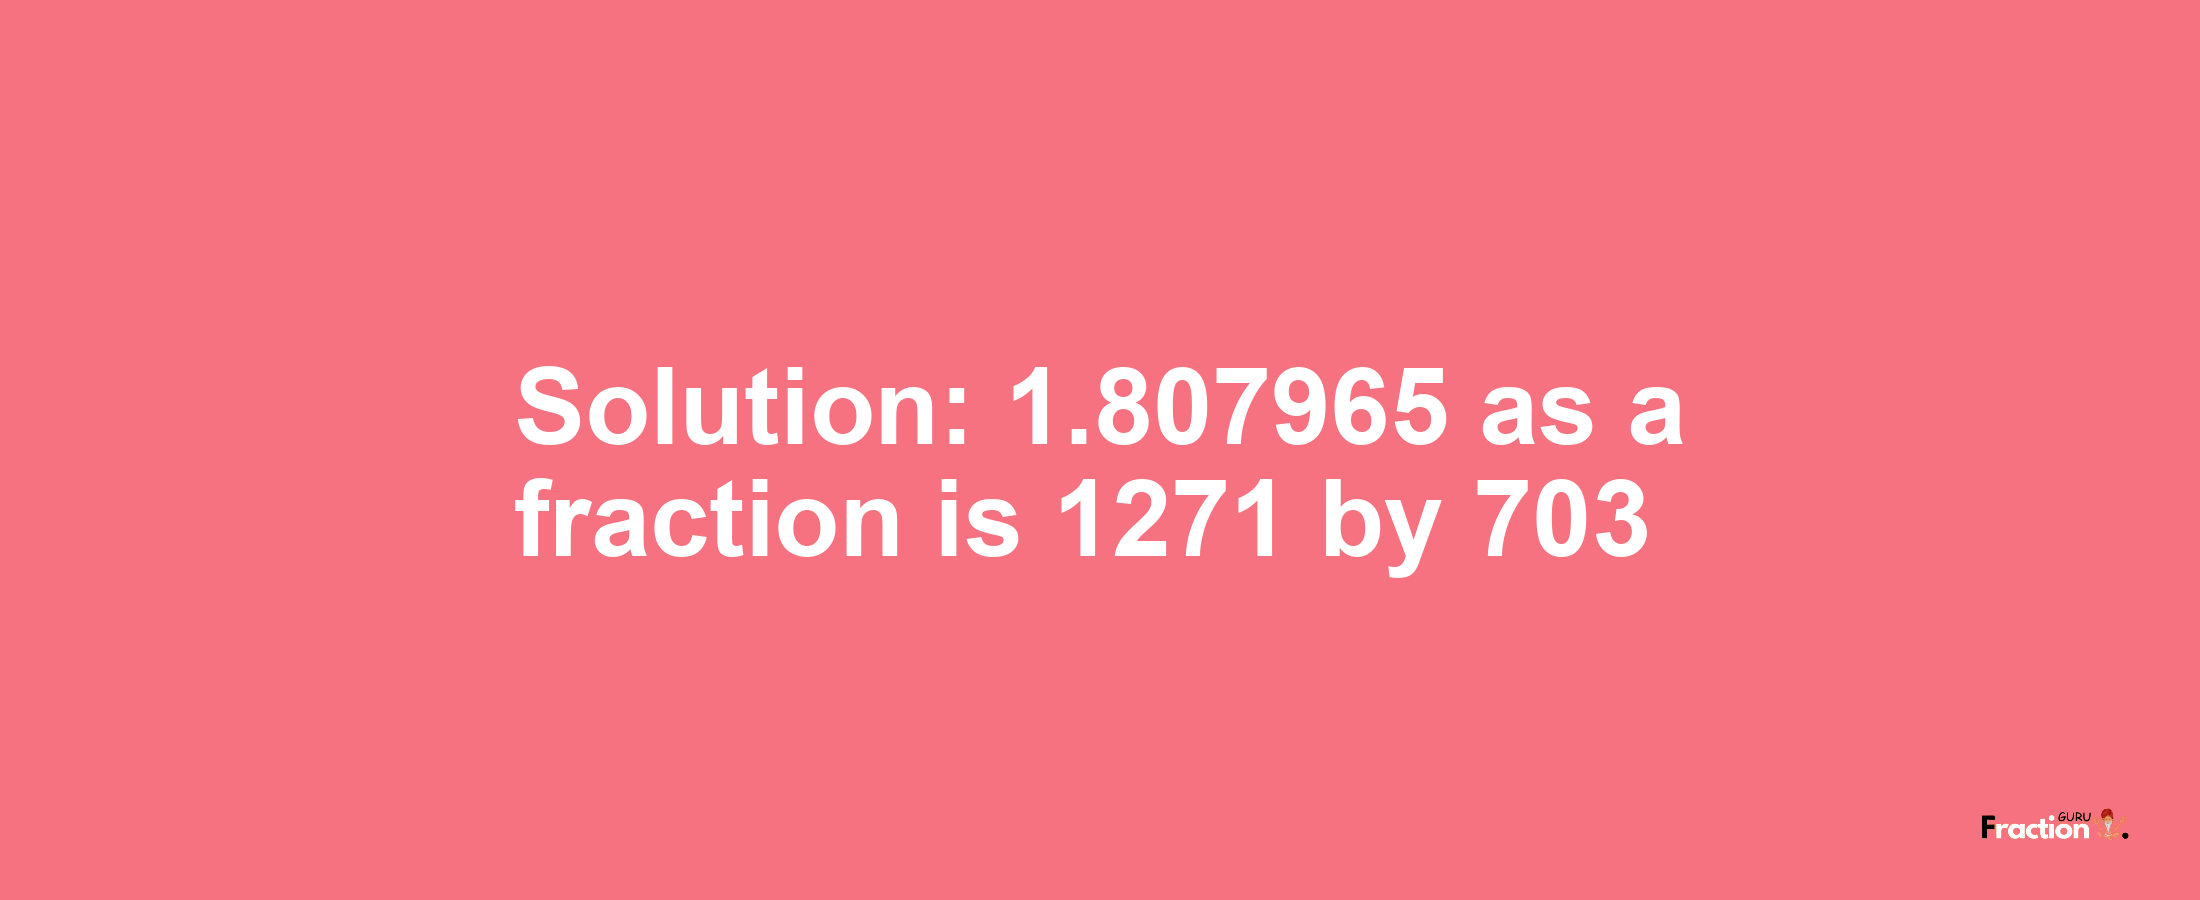 Solution:1.807965 as a fraction is 1271/703